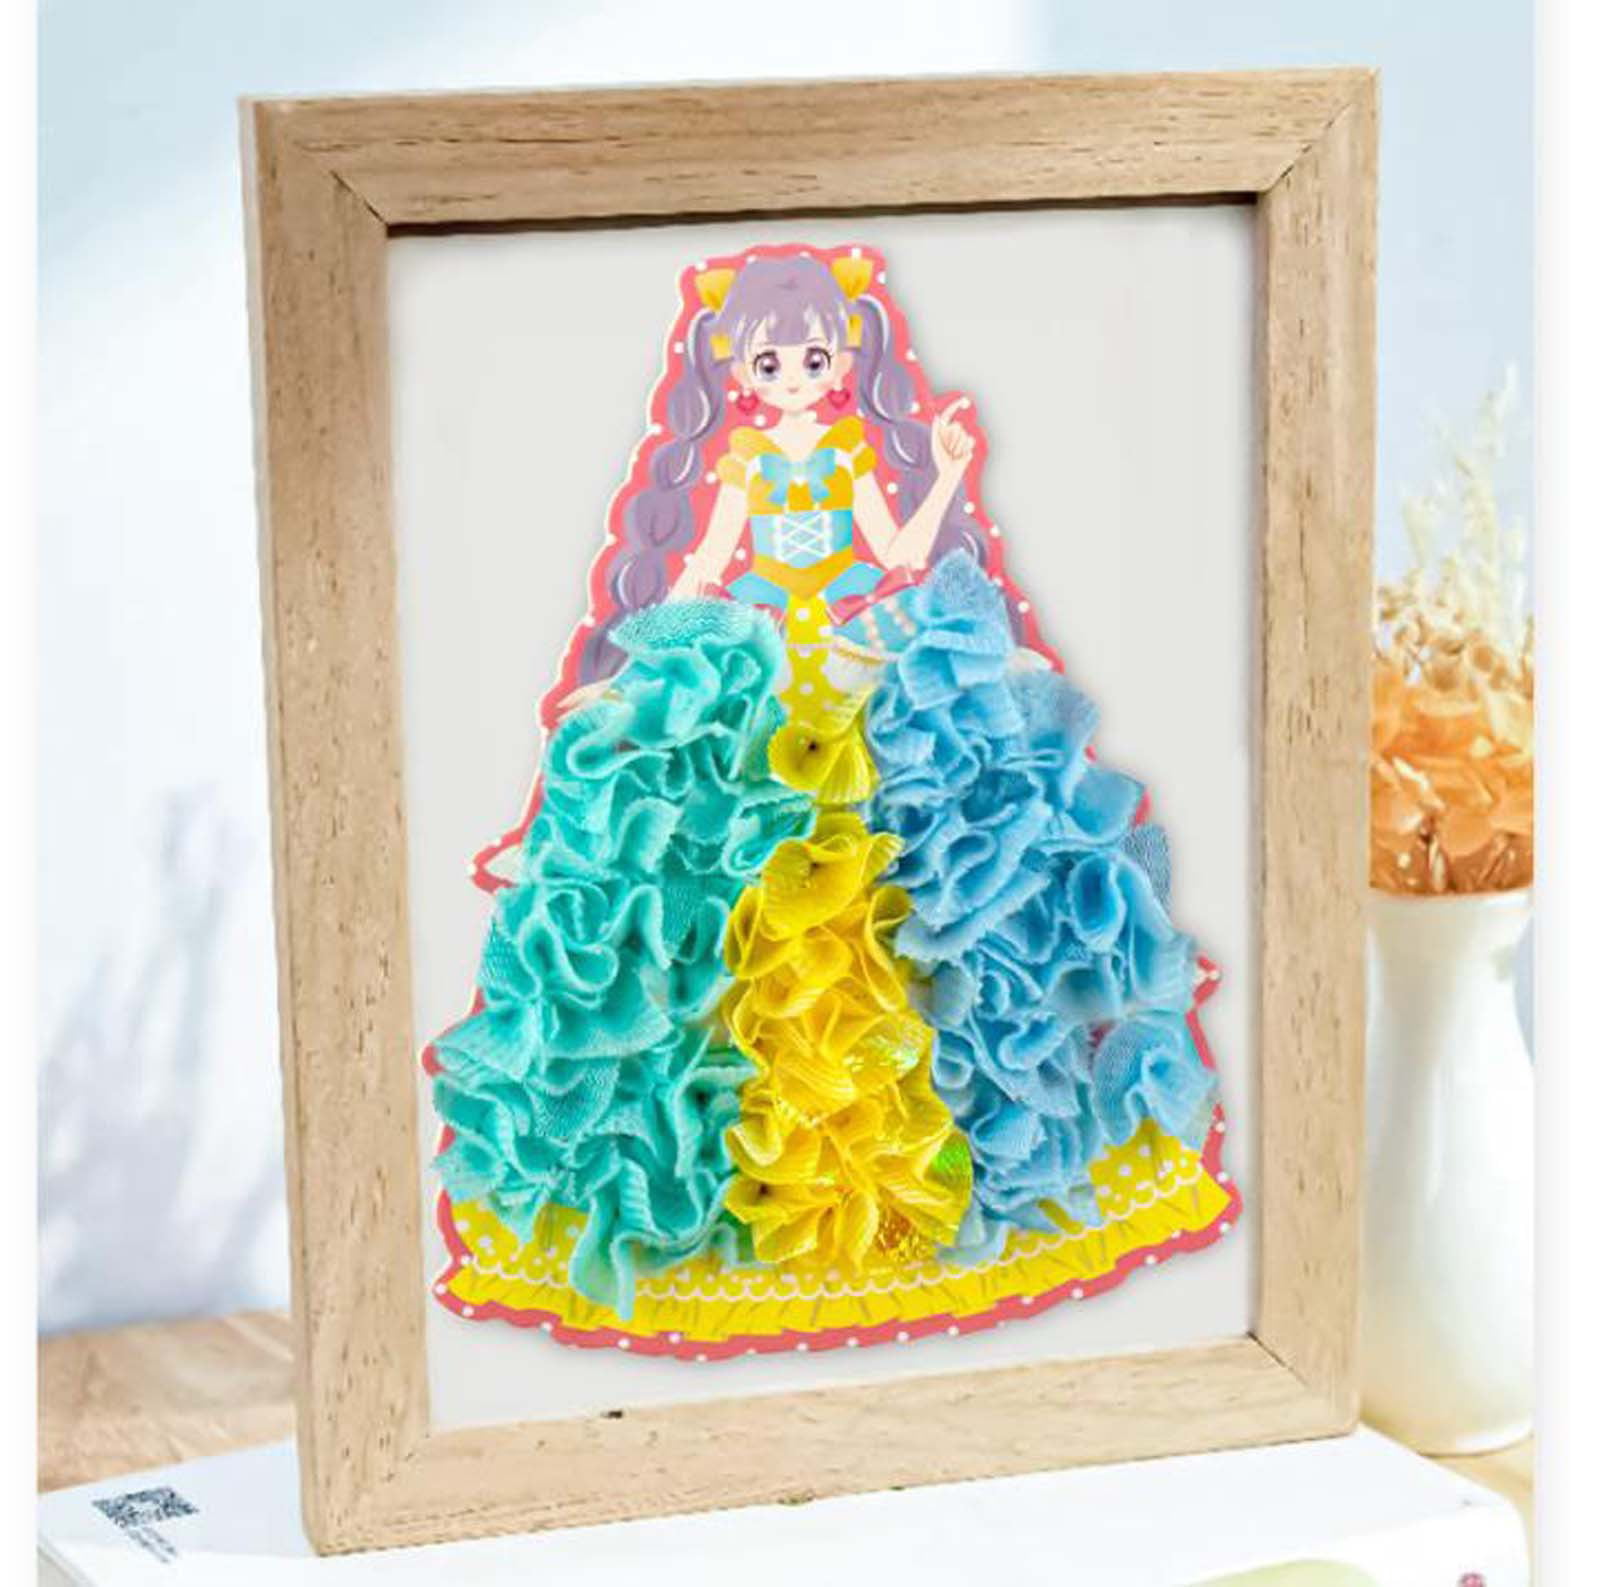 Creative Puzzle Puncture Painting For Kids 8-12,diy Princess Dress-up Crafts  For Girls, 2023 Children's Fabric Art Craze Poke Drawing Christmas Gift